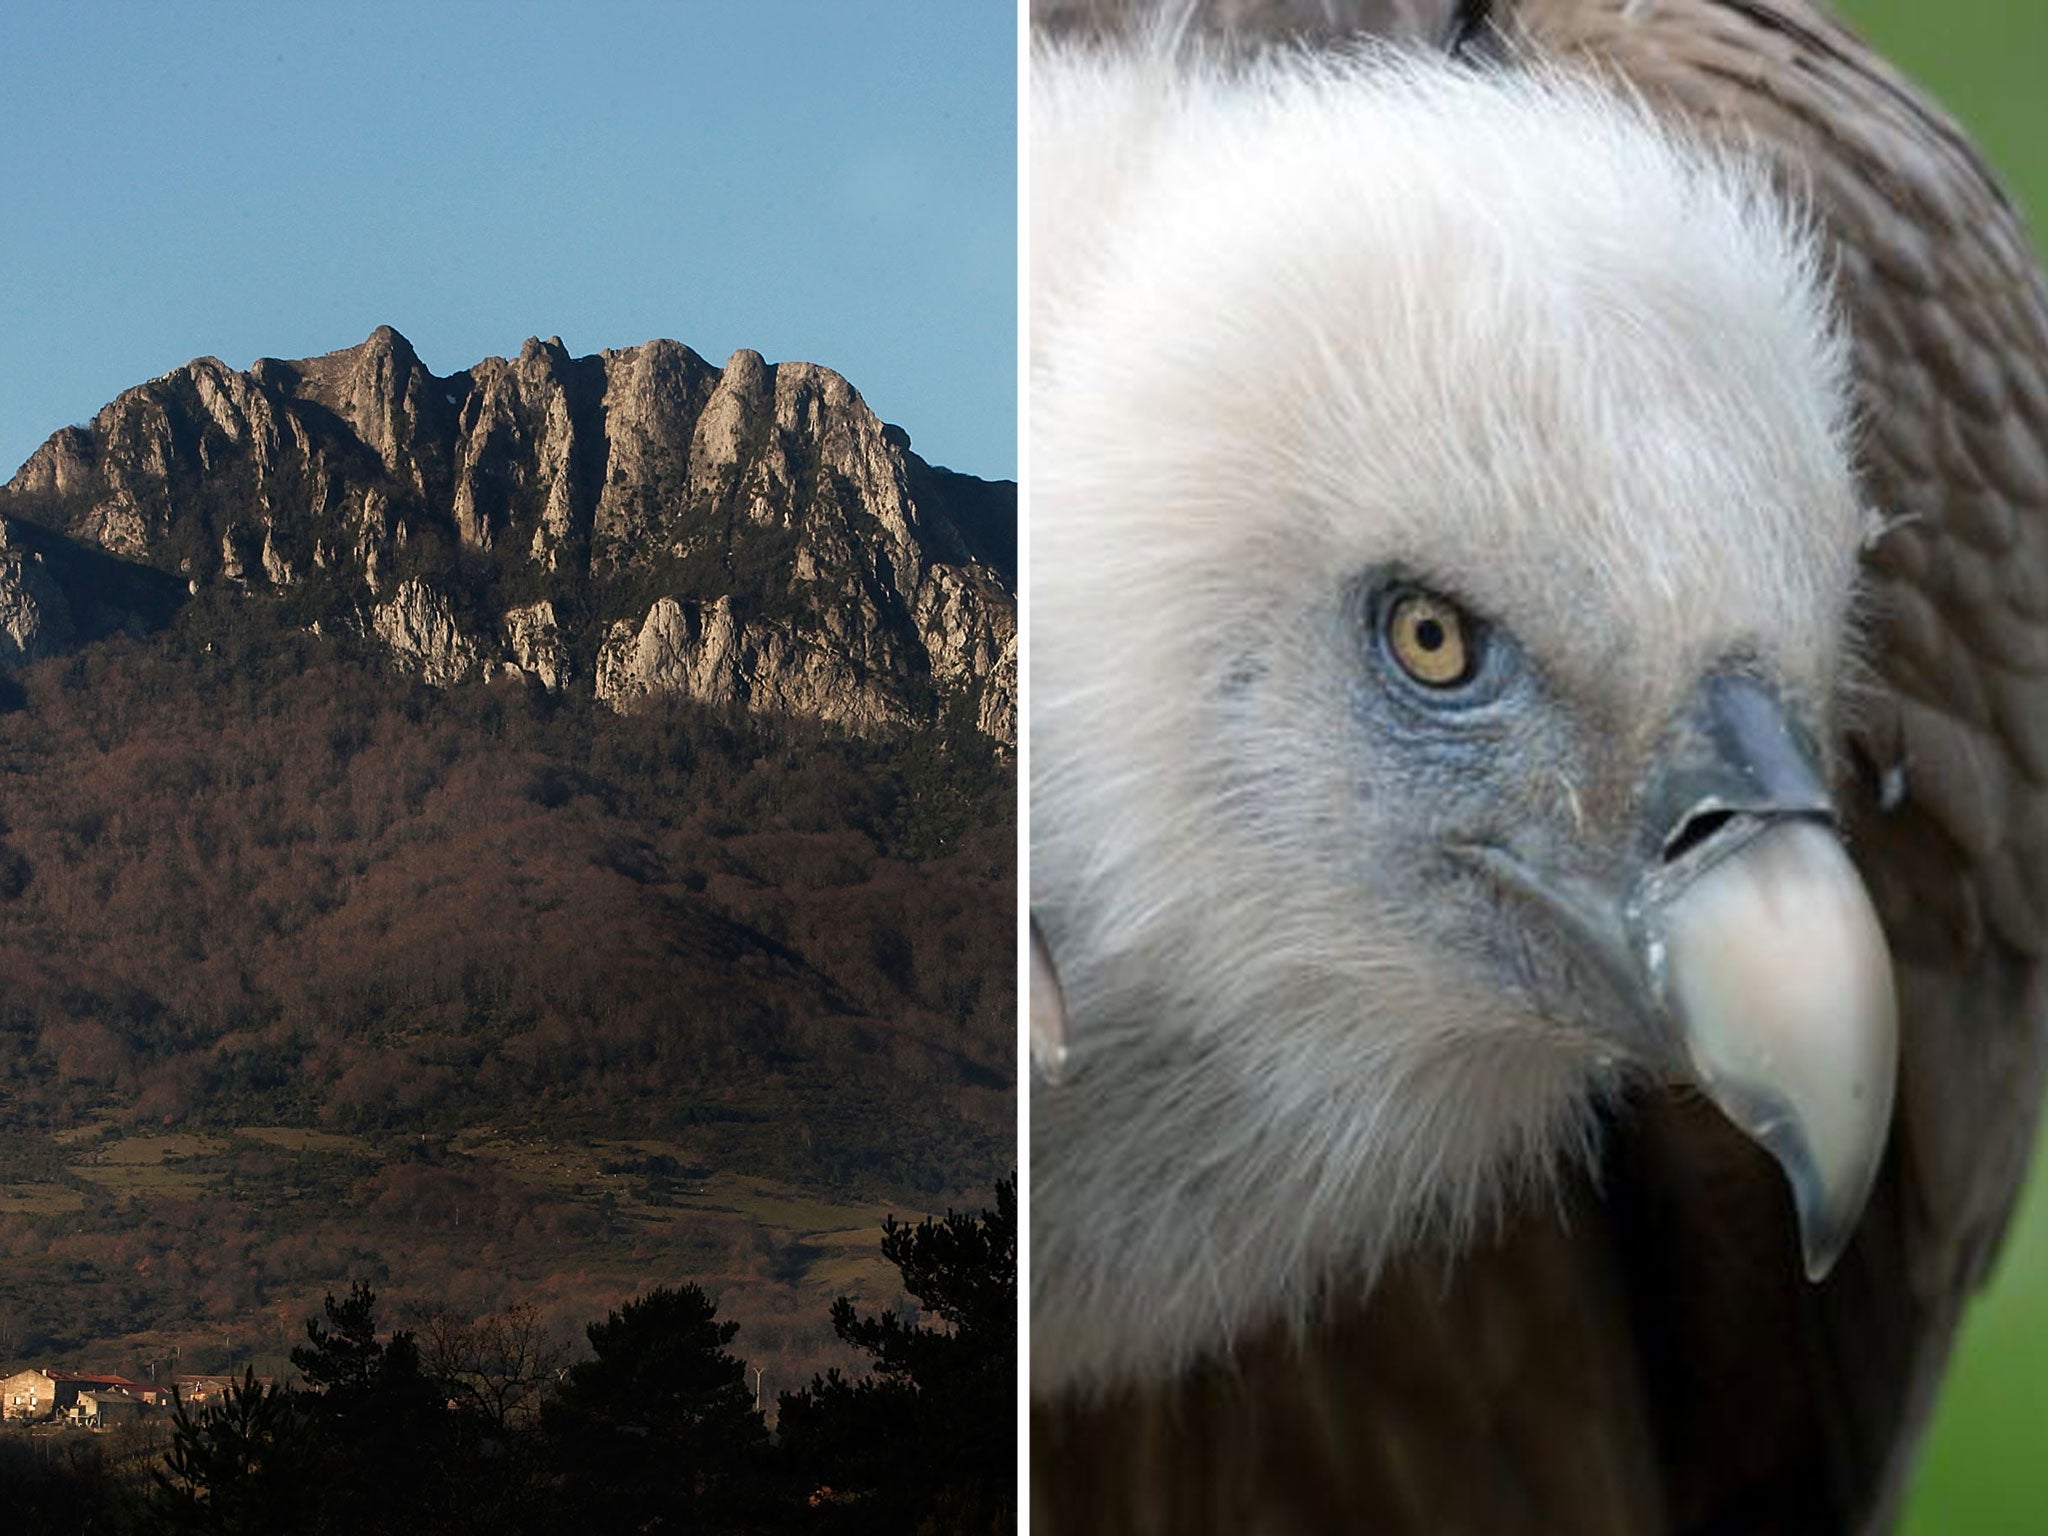 The body of a woman who died in the Pyrenees was eaten by vultures in 40-50 minutes